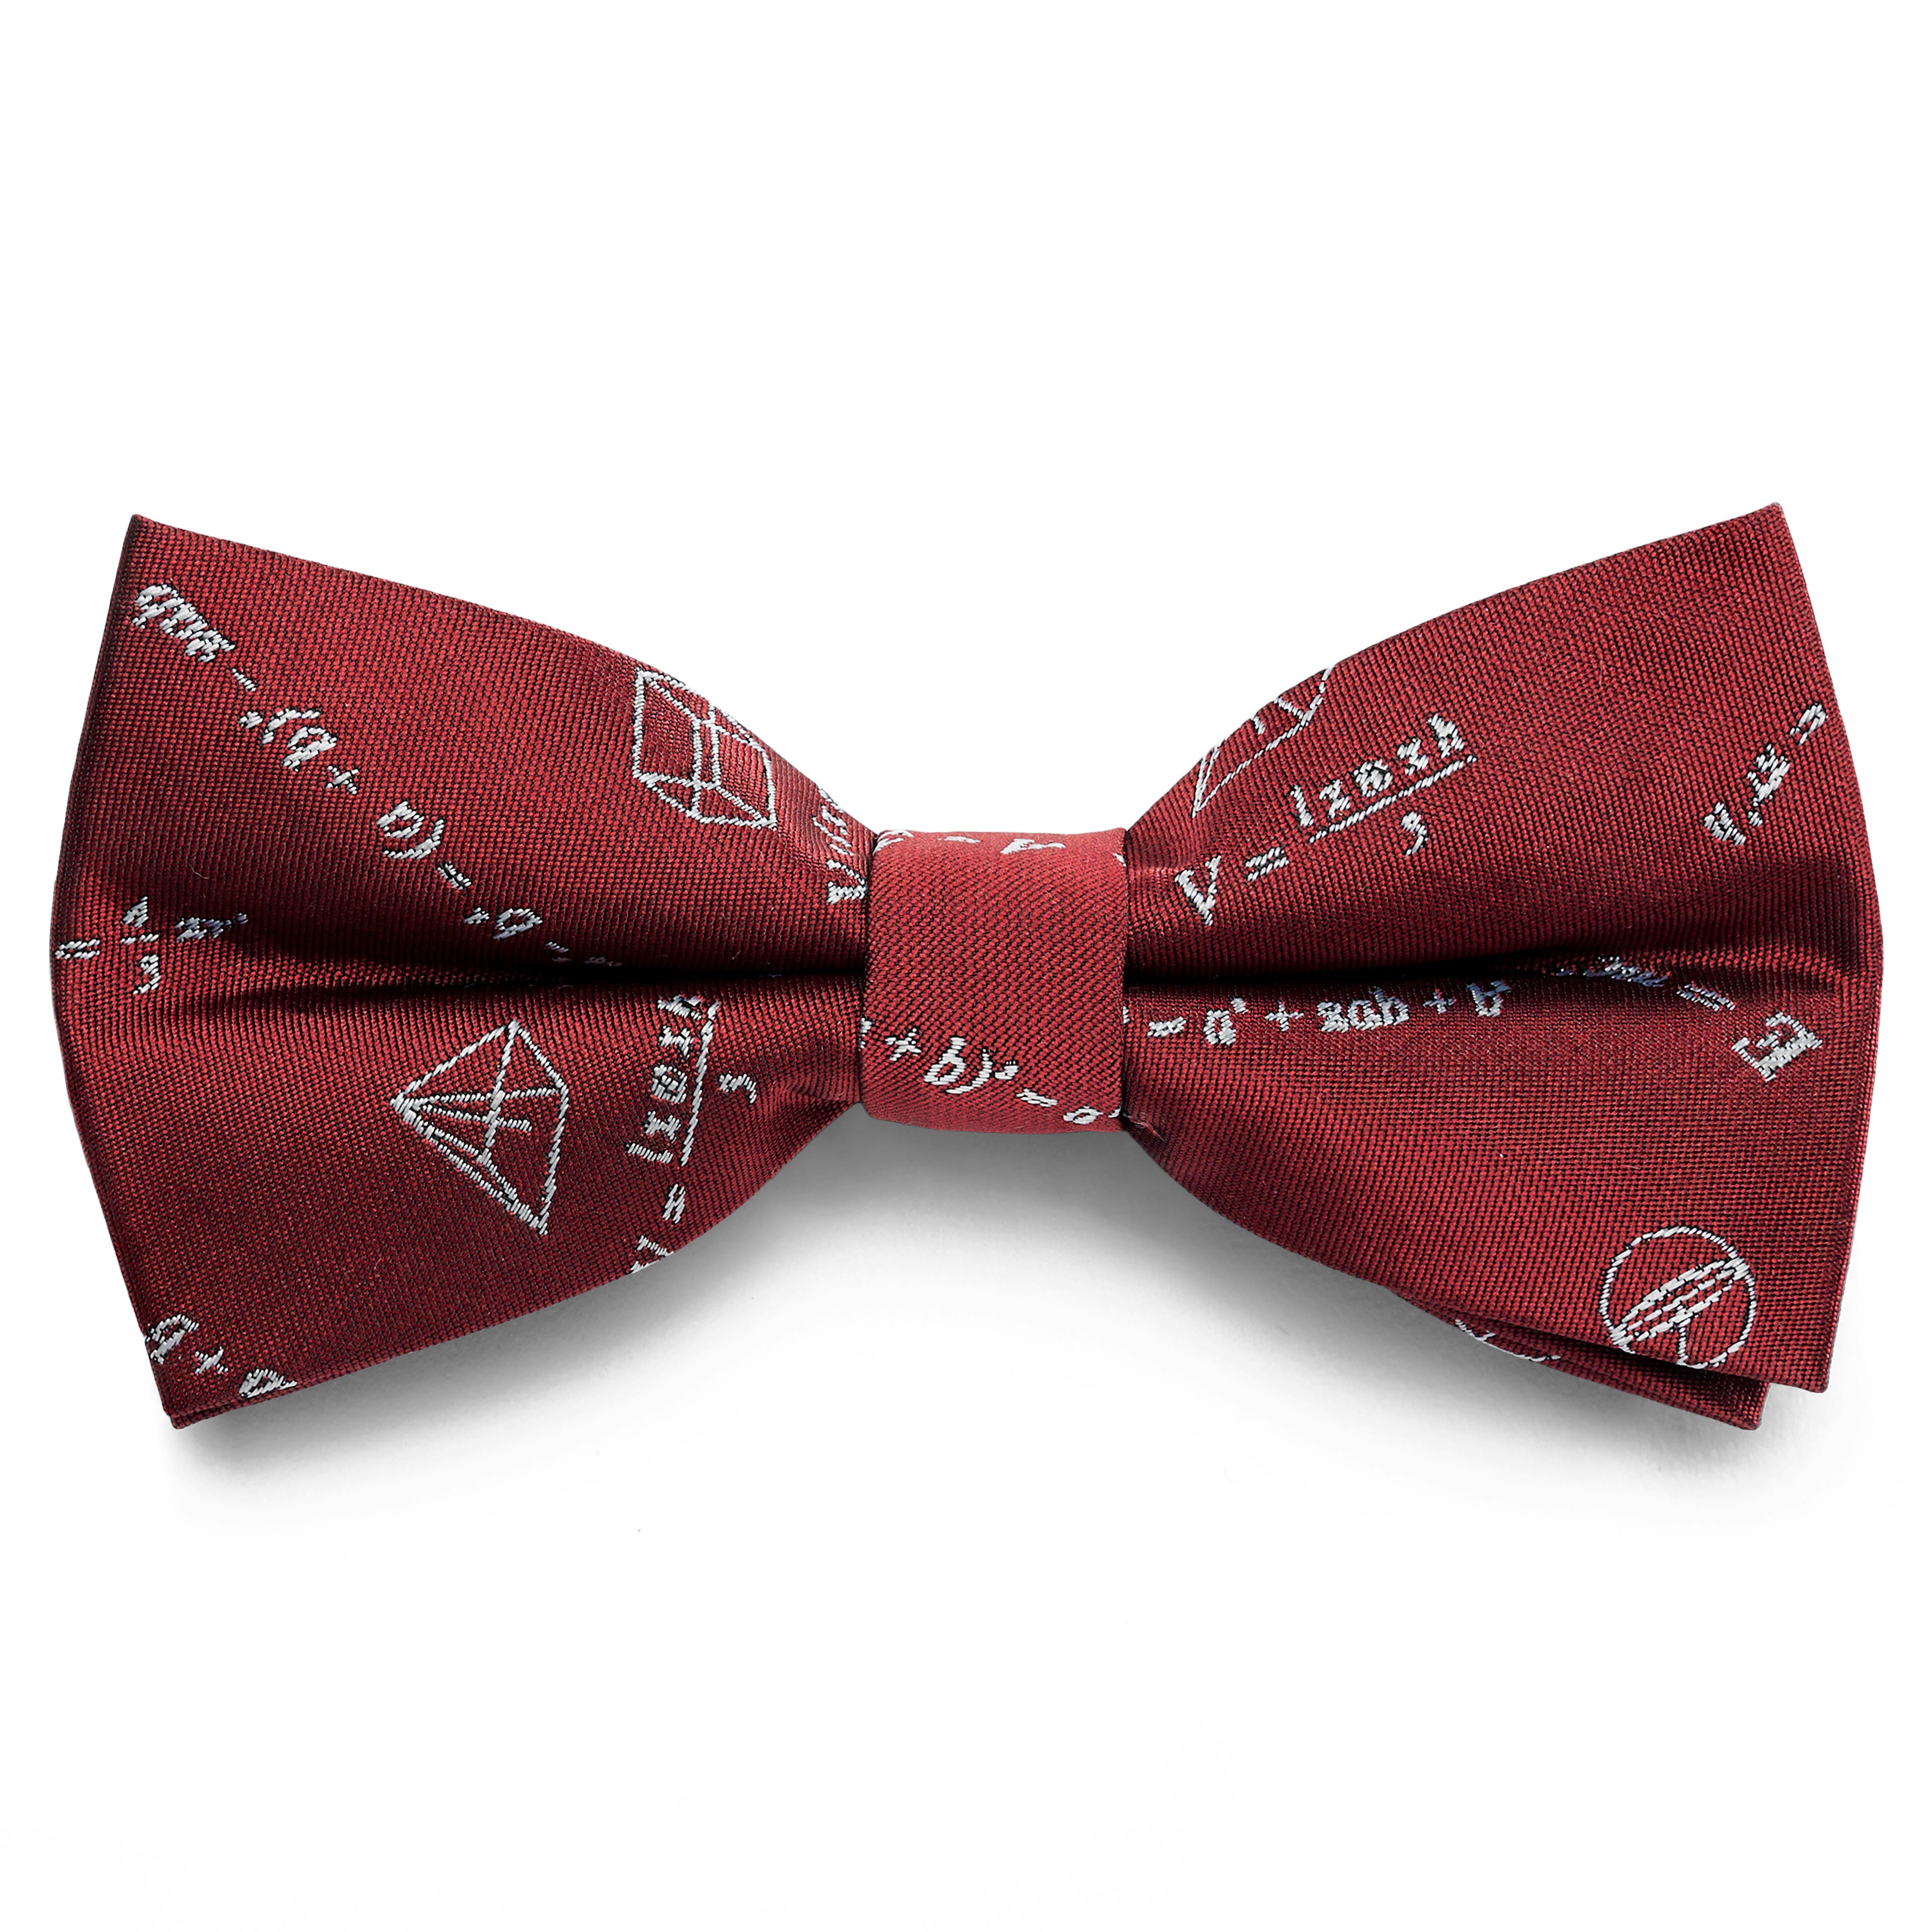 Burgundy with Math Equations Pre-Tied Bow Tie